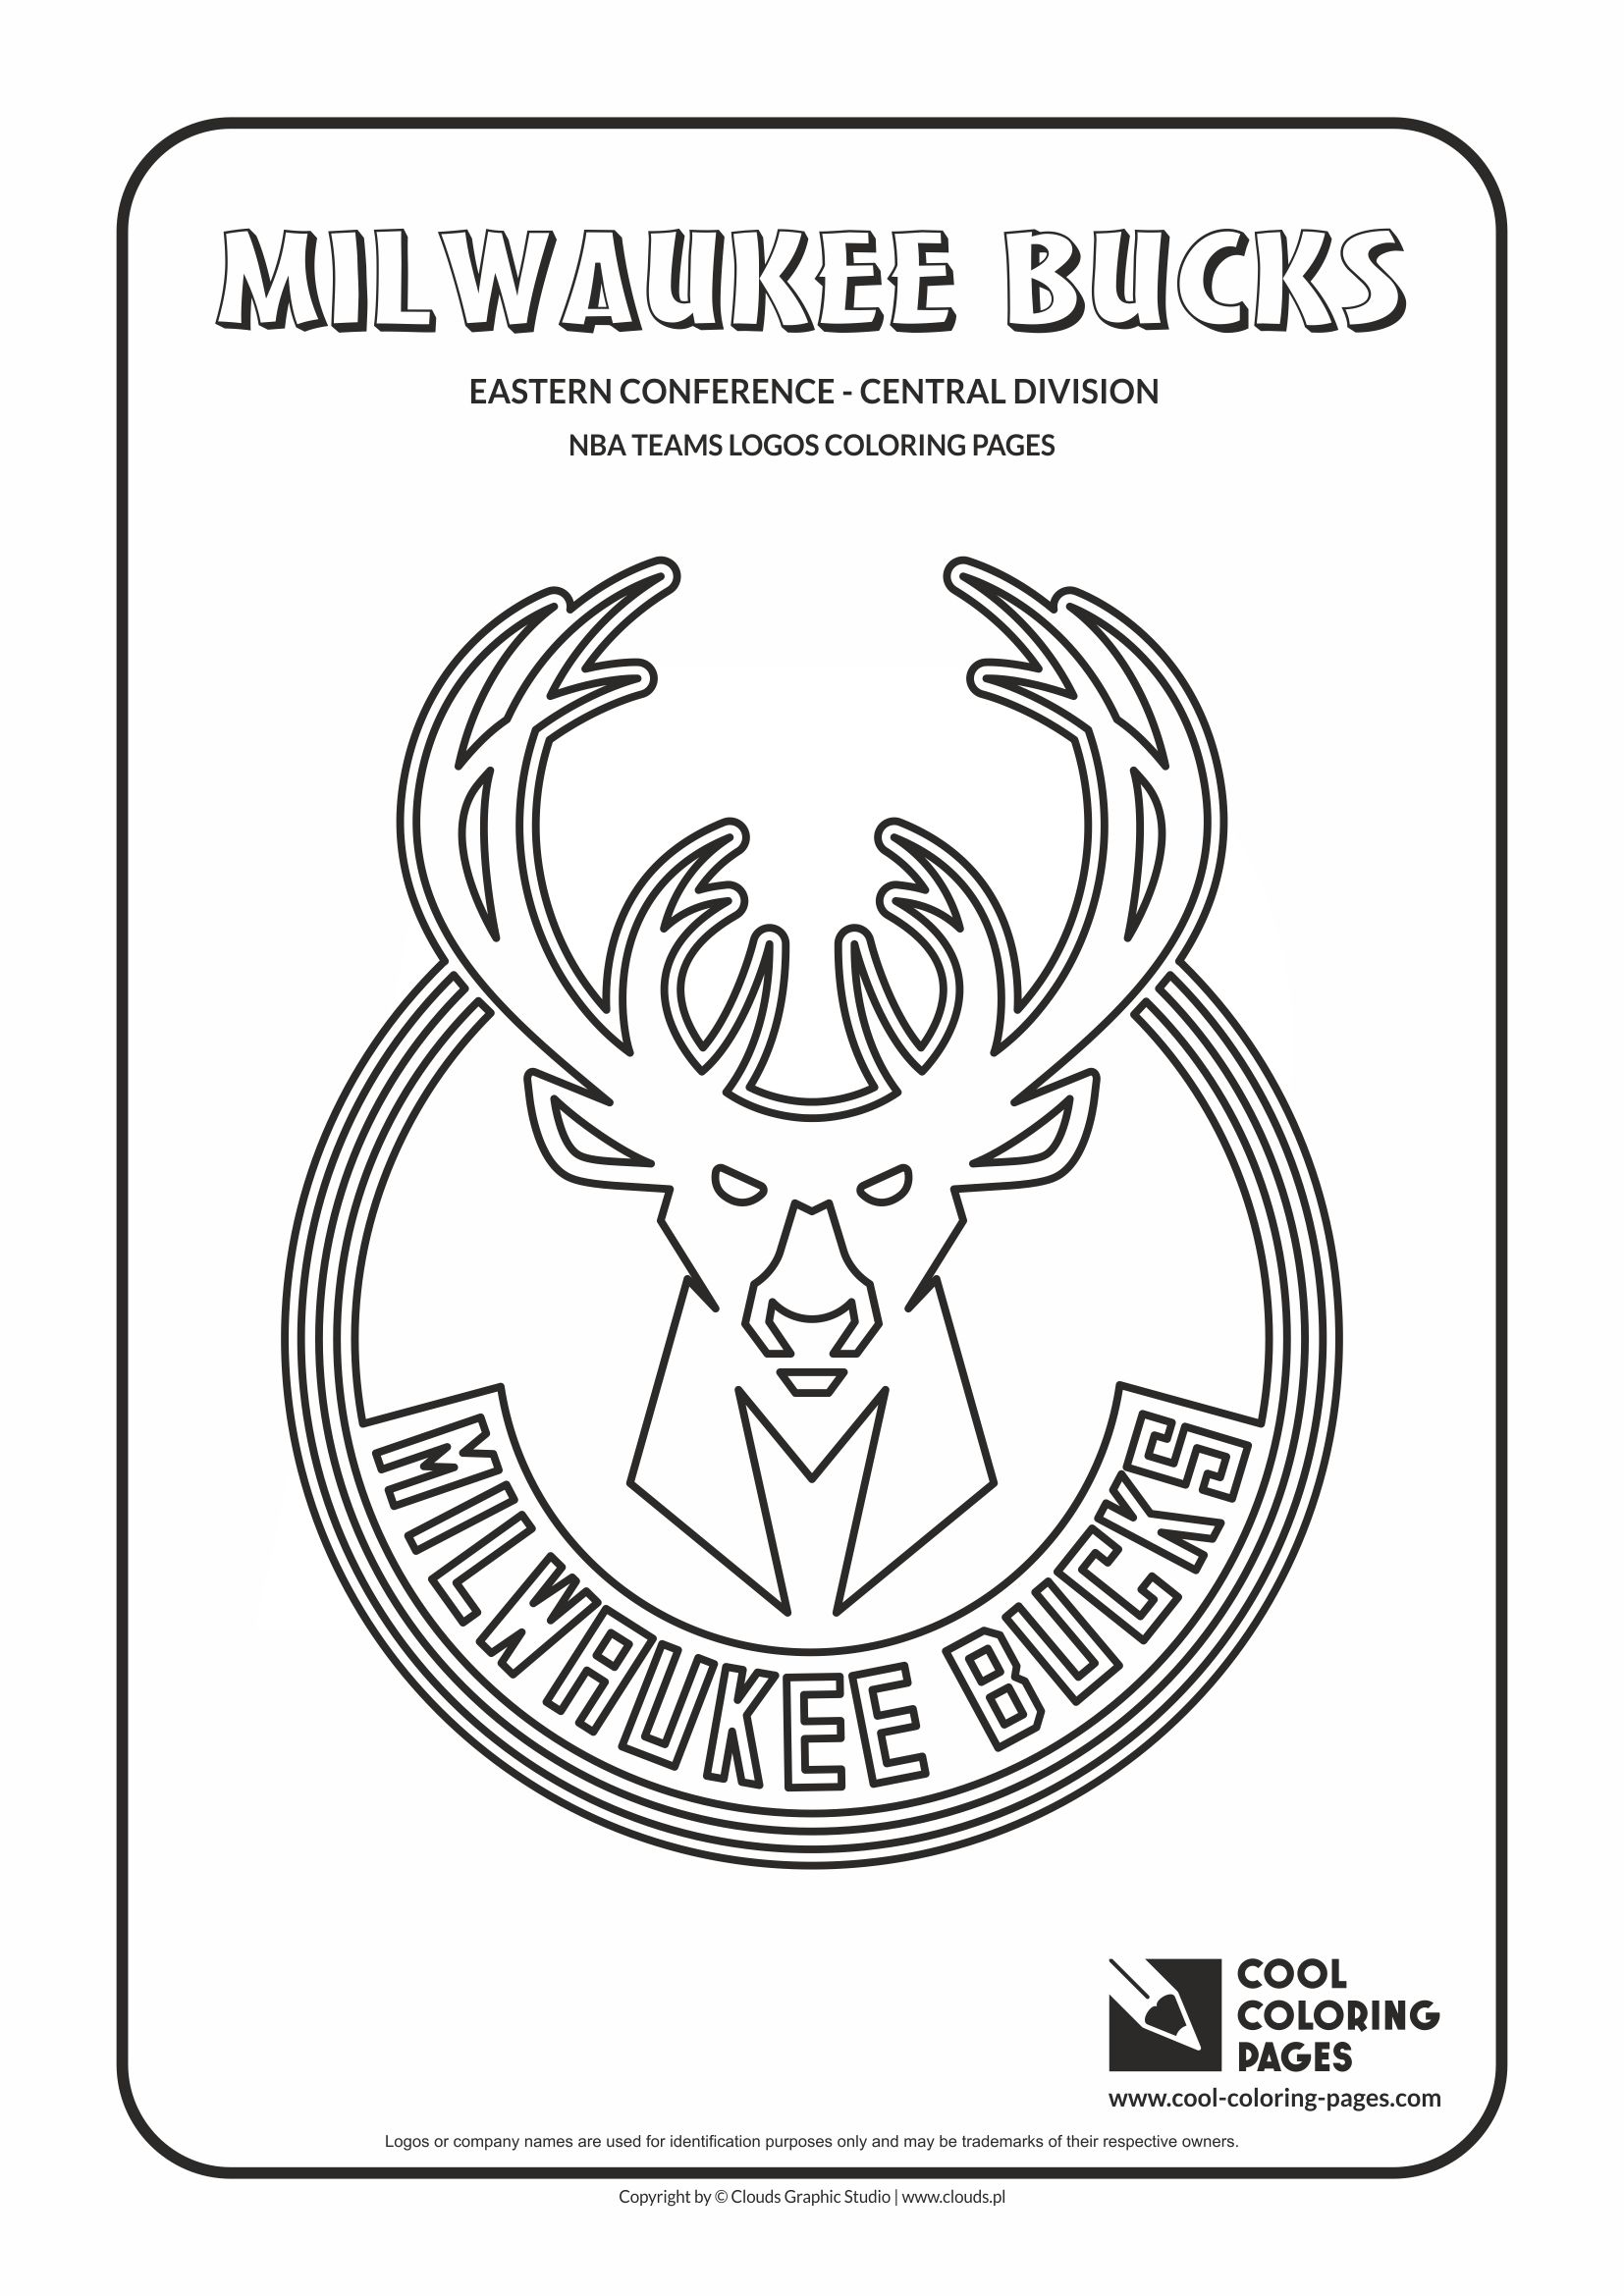 Cool Coloring Pages Milwaukee Bucks Nba Basketball Teams Logos Coloring Pages Cool Coloring Pages Free Educational Coloring Pages And Activities For Kids